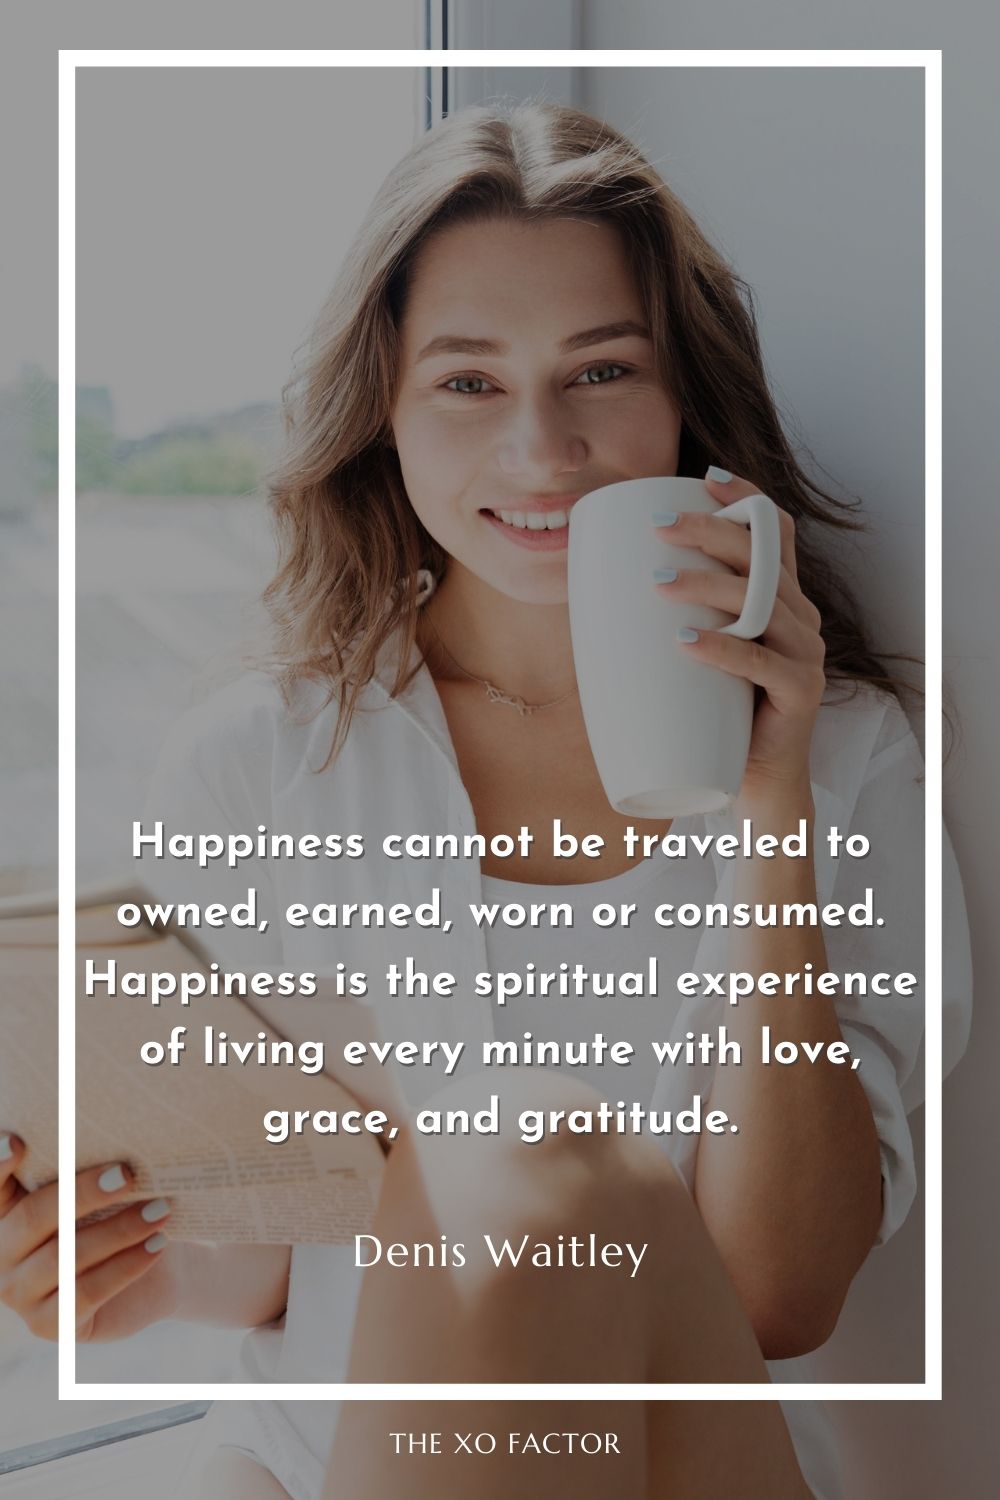 Happiness cannot be traveled to owned, earned, worn or consumed. Happiness is the spiritual experience of living every minute with love, grace, and gratitude.